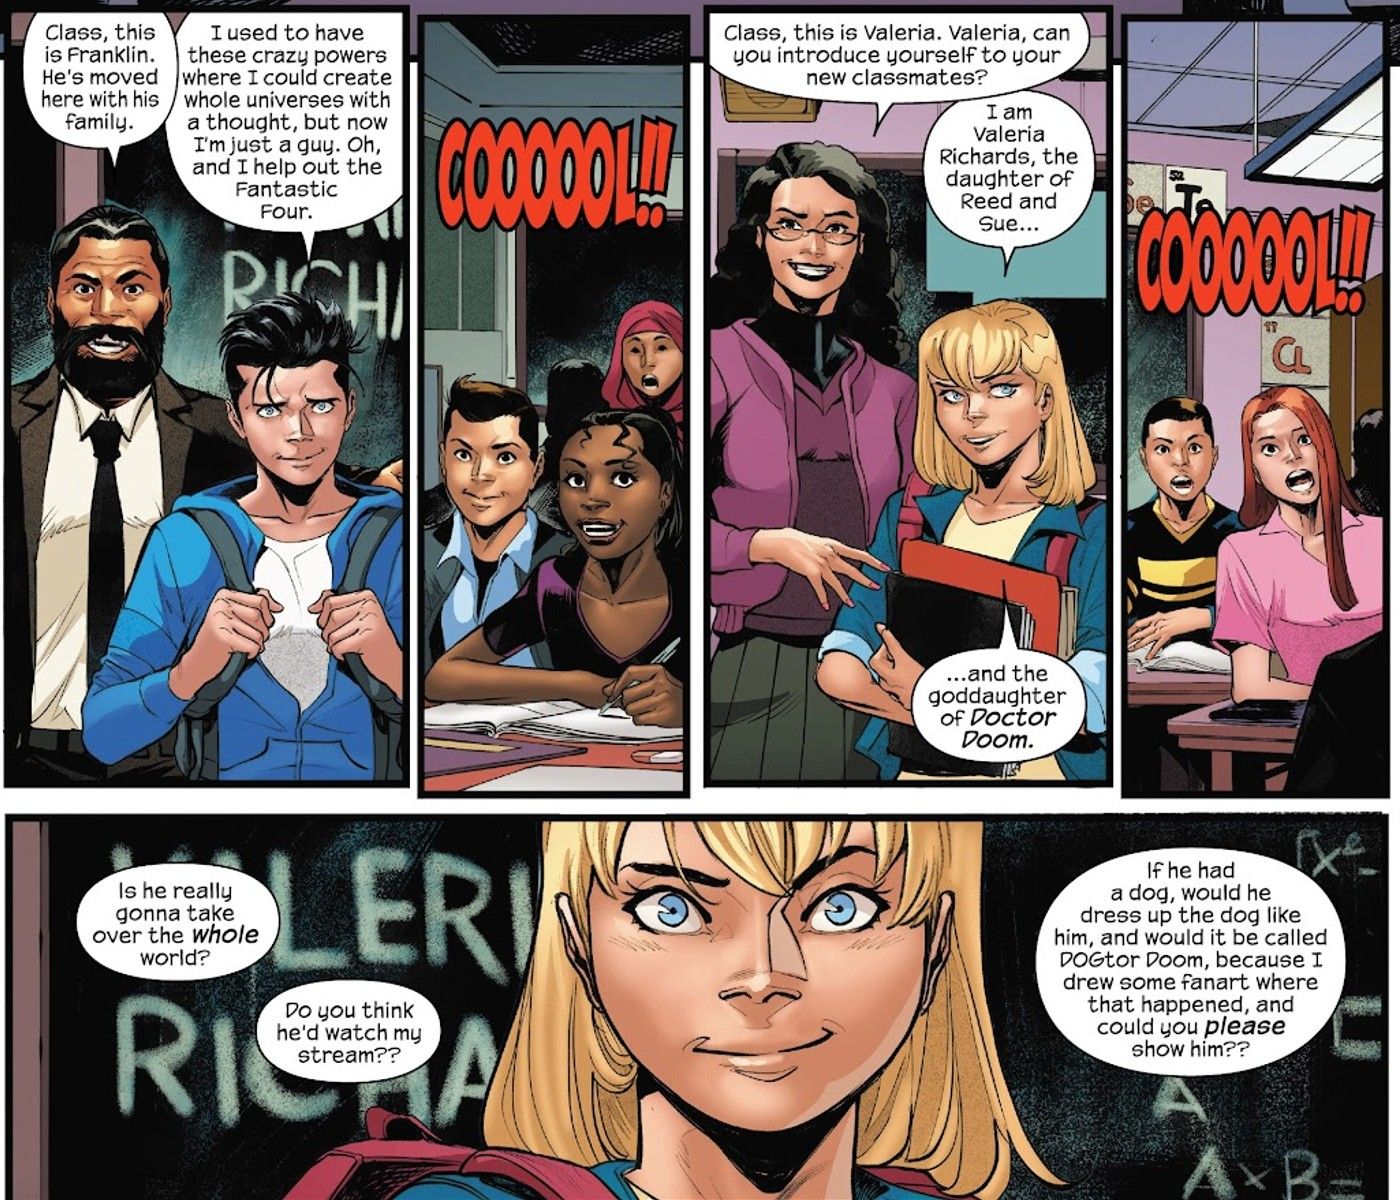 Franklin and Valeria Richards of the Fantastic Four introduce themselves to their new classmates